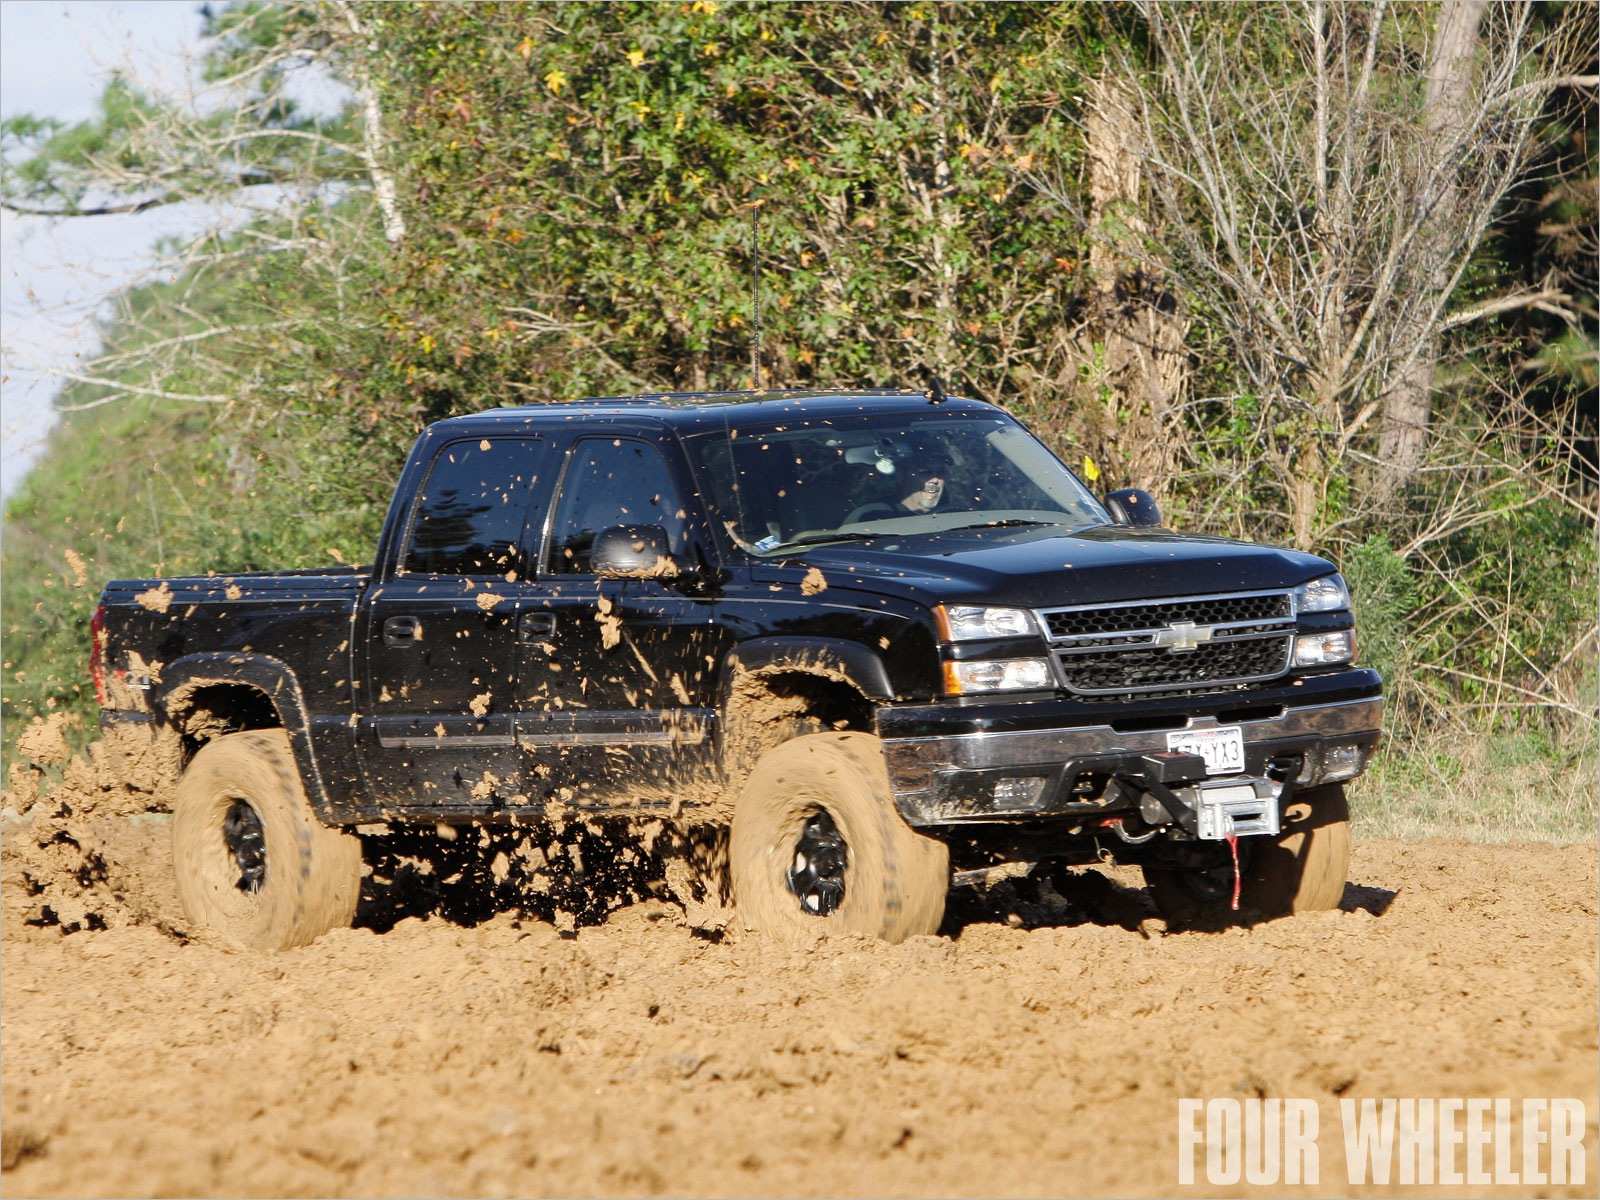 Chevy Trucks In The Mud Fresh Mud Truck Wallpapers - Black Chevy Silverado Mudding , HD Wallpaper & Backgrounds